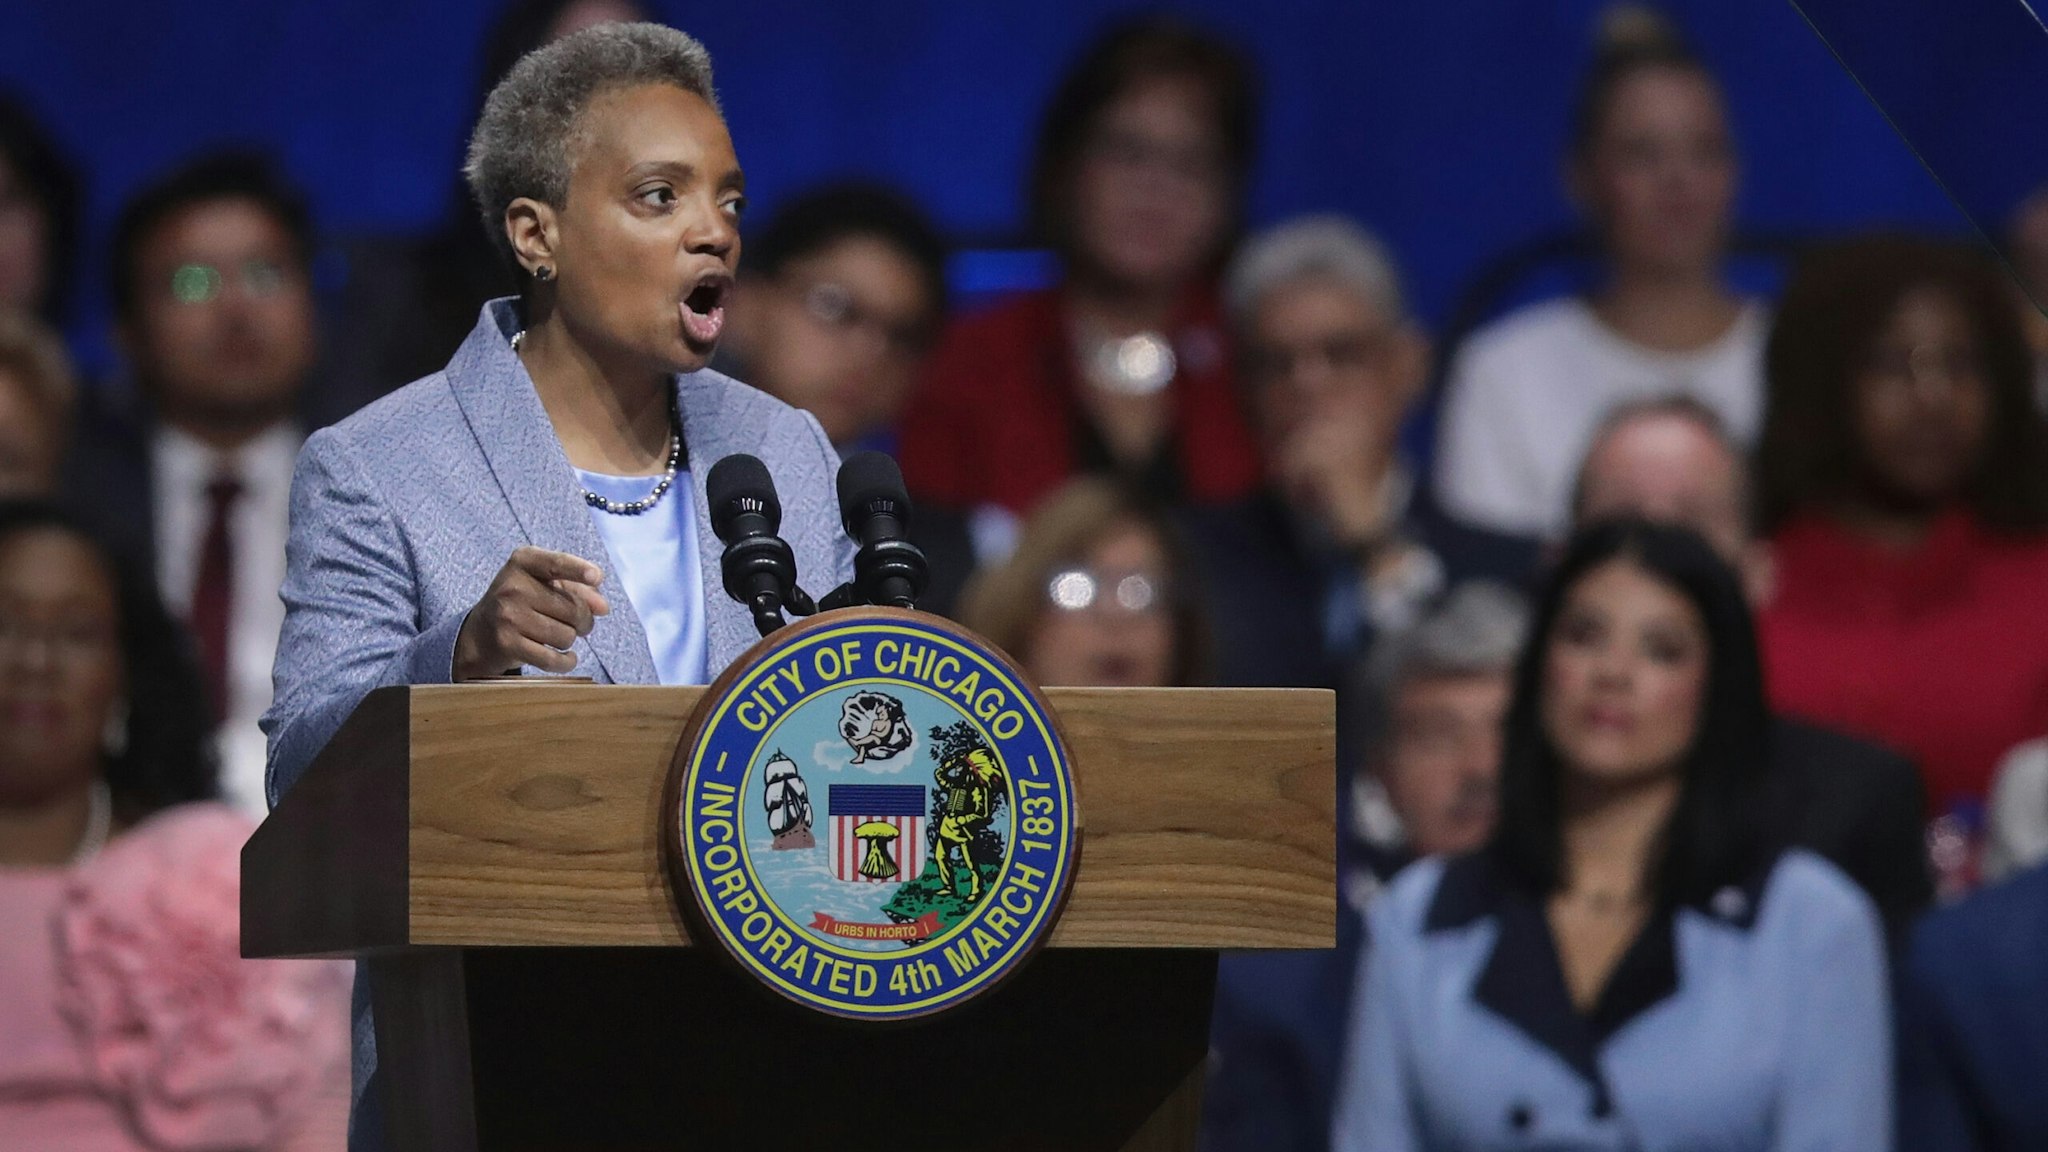 CHICAGO, ILLINOIS - MAY 20: Lori Lightfoot addresses guests after being sworn in as Mayor of Chicago during a ceremony at the Wintrust Arena on May 20, 2019 in Chicago, Illinois. Lightfoot become the first black female and openly gay Mayor in the city’s history. (Photo by Scott Olson/Getty Images)